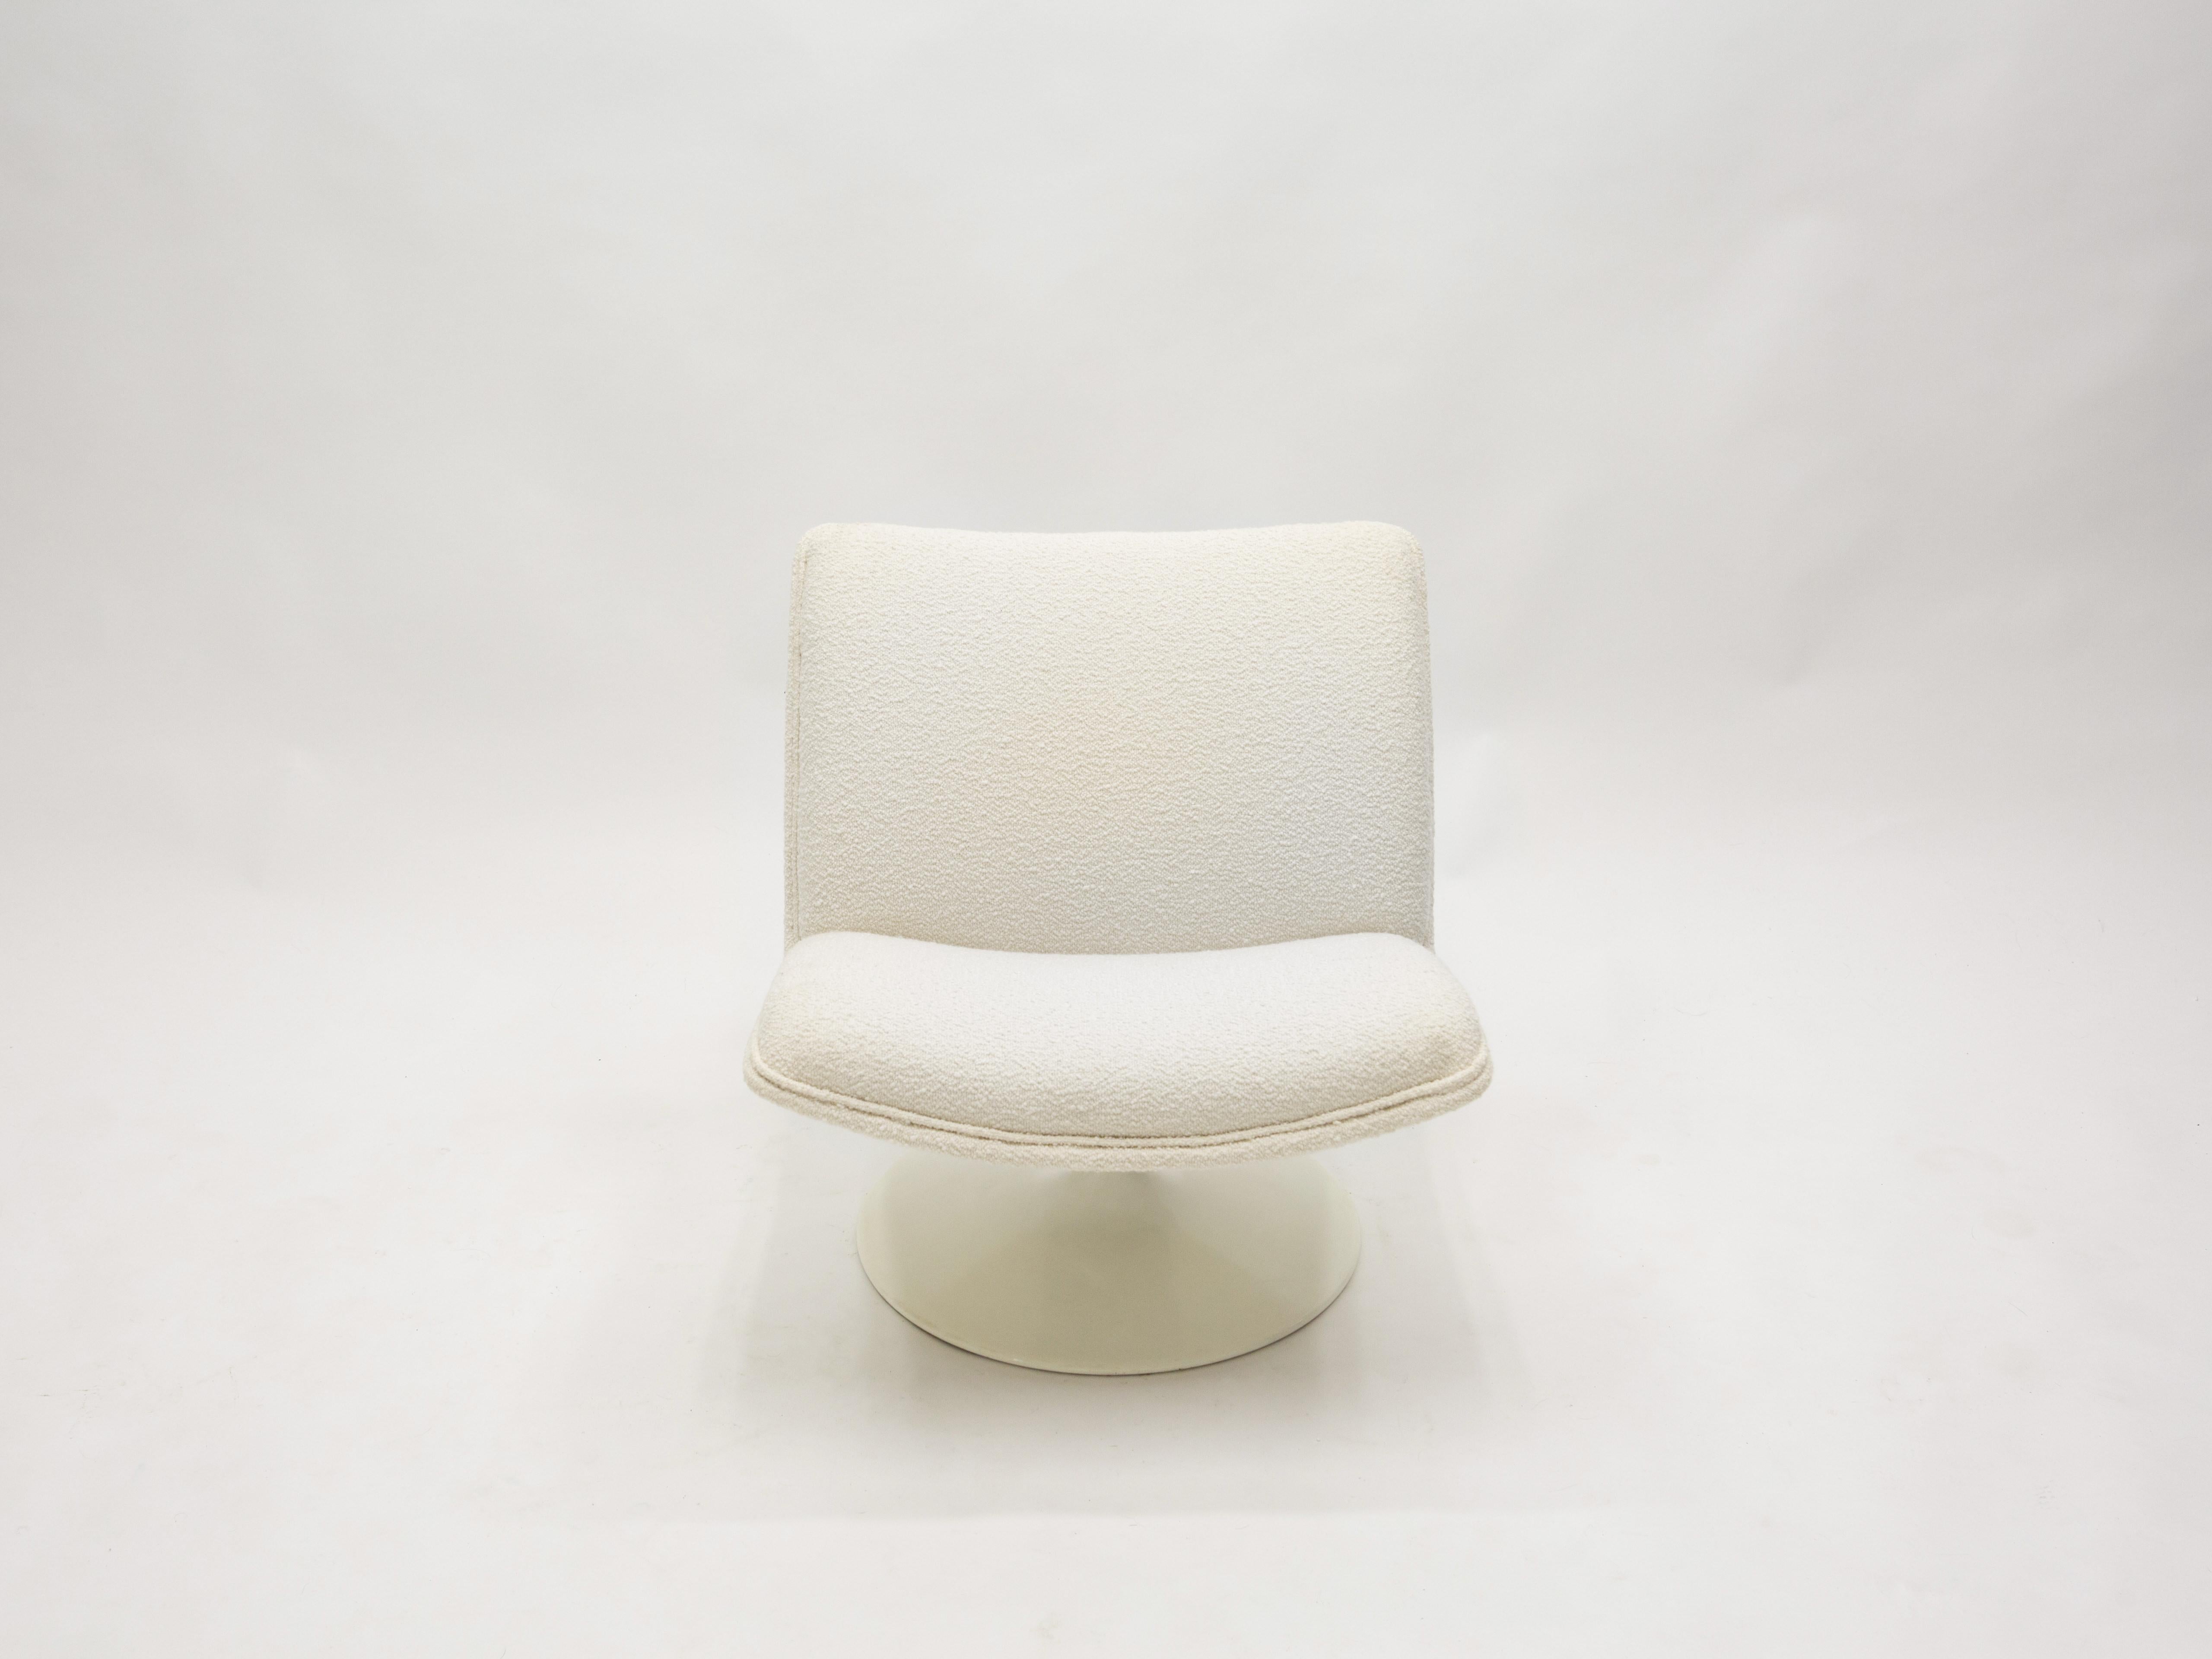 Rare and beautiful swivel lounge chair by Geoffrey Harcourt for Artifort, model F504, entirely reupholstered with wool bouclé by Lelièvre. This chair has a decidedly vintage Space Age appeal, calling to mind film sets. Its fiber glass foot has a